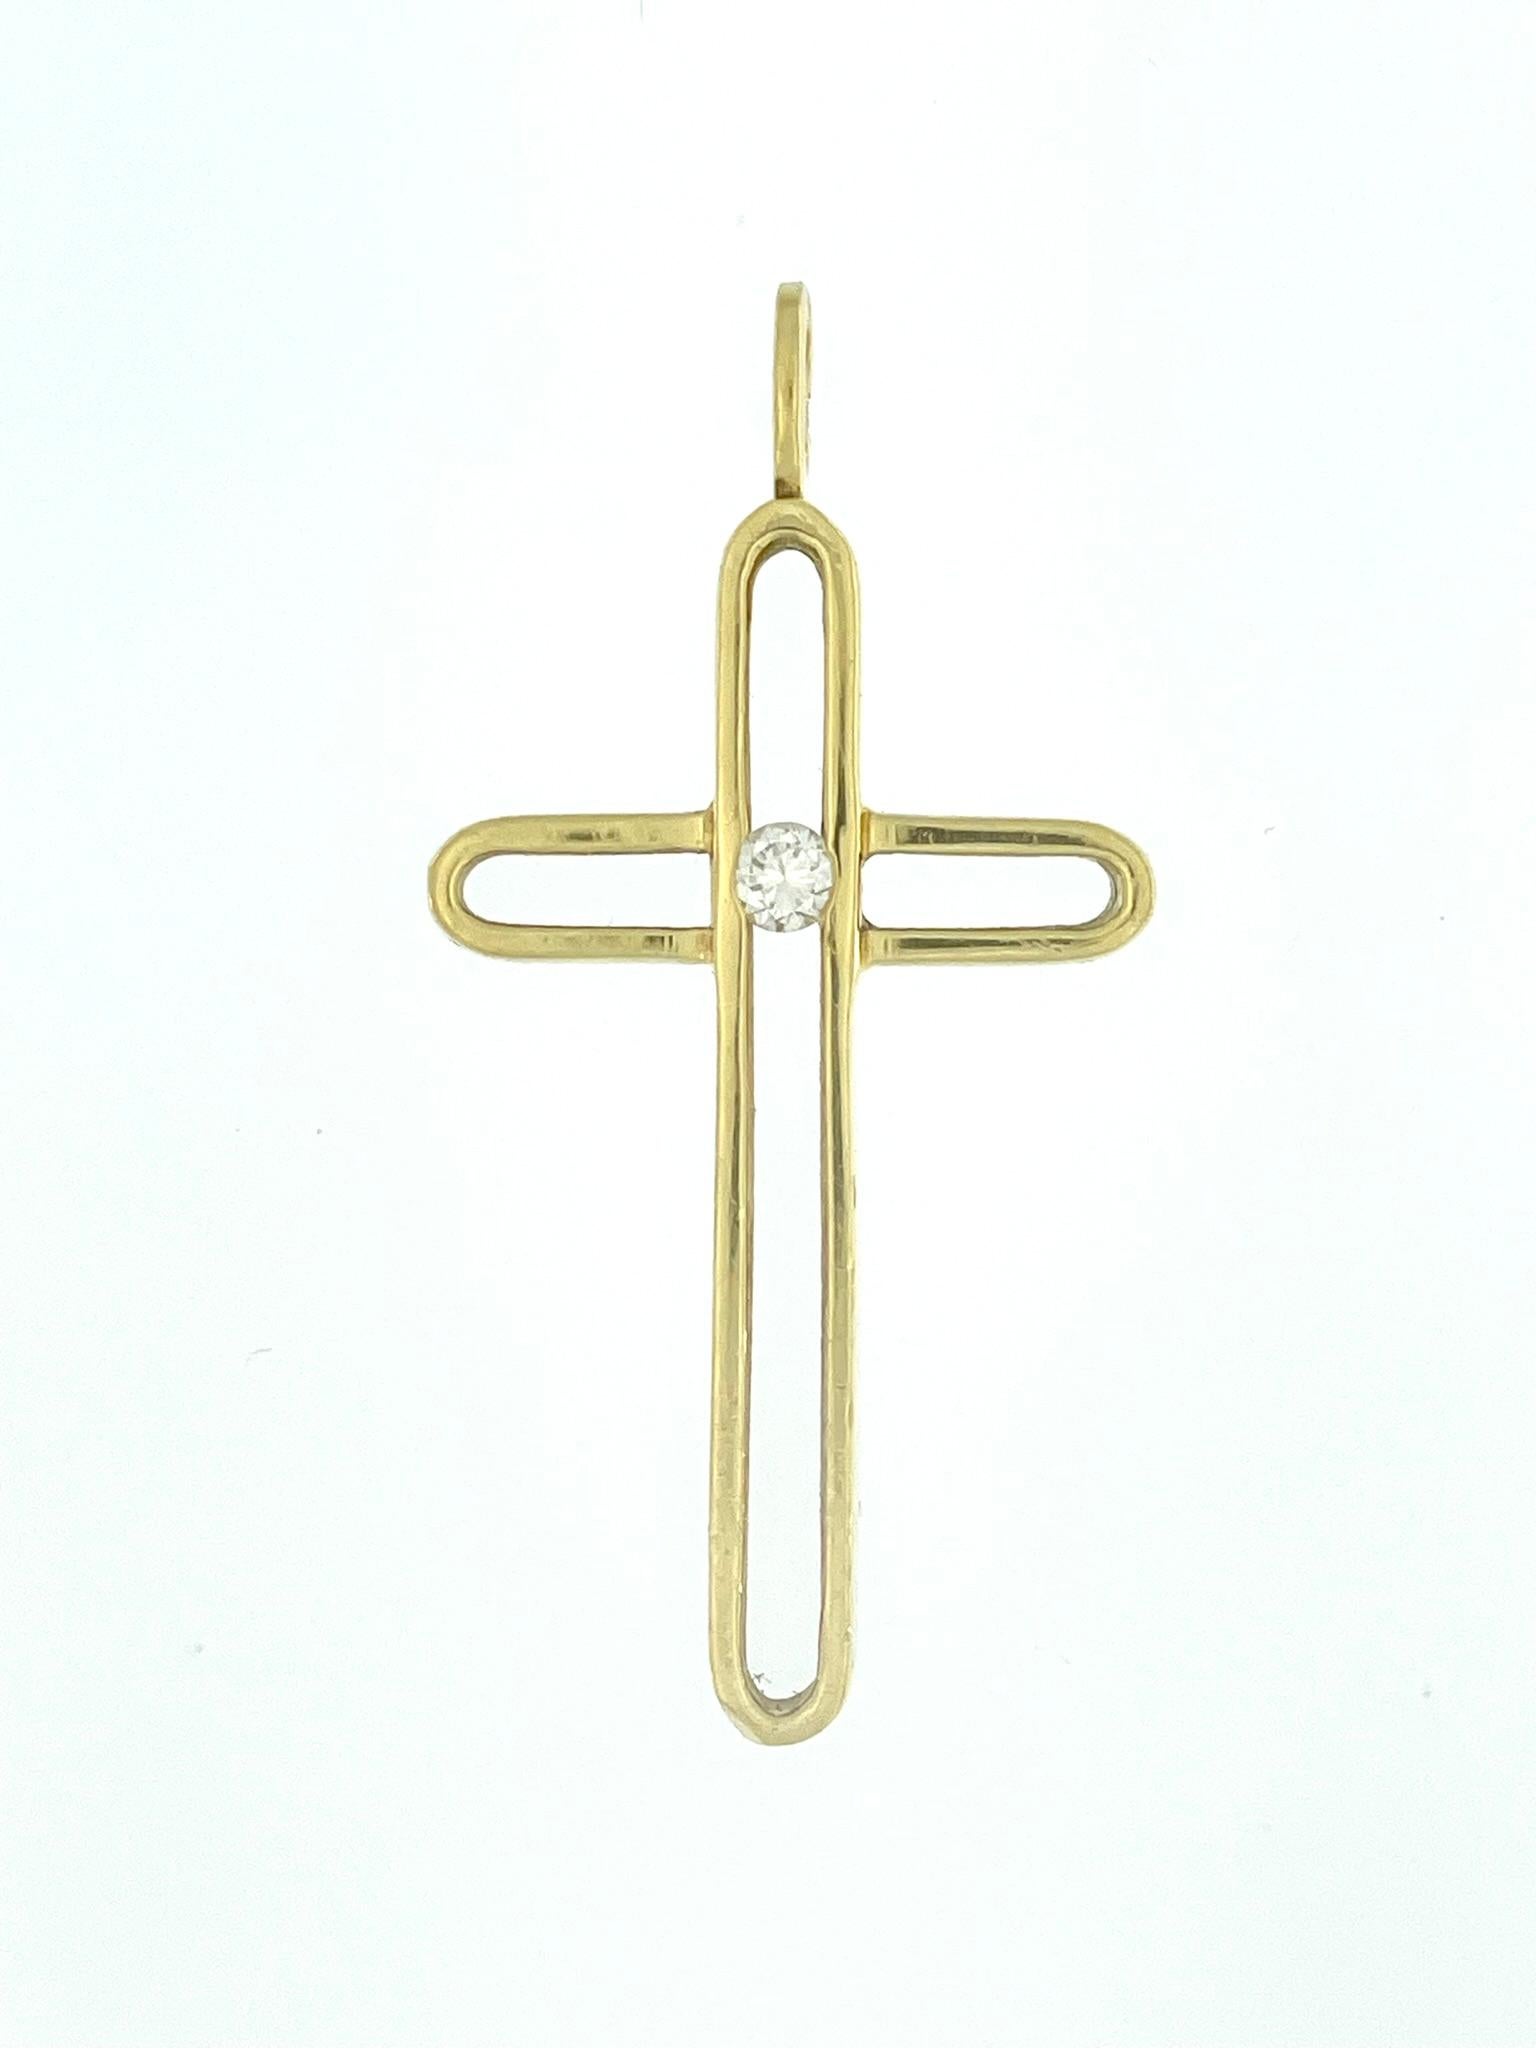 The Modern 18 karat Yellow Gold Diamond Cross is a contemporary and sophisticated religious pendant that seamlessly blends timeless symbolism with luxurious design. The focal point of this cross is a central diamond, which adds a touch of brilliance